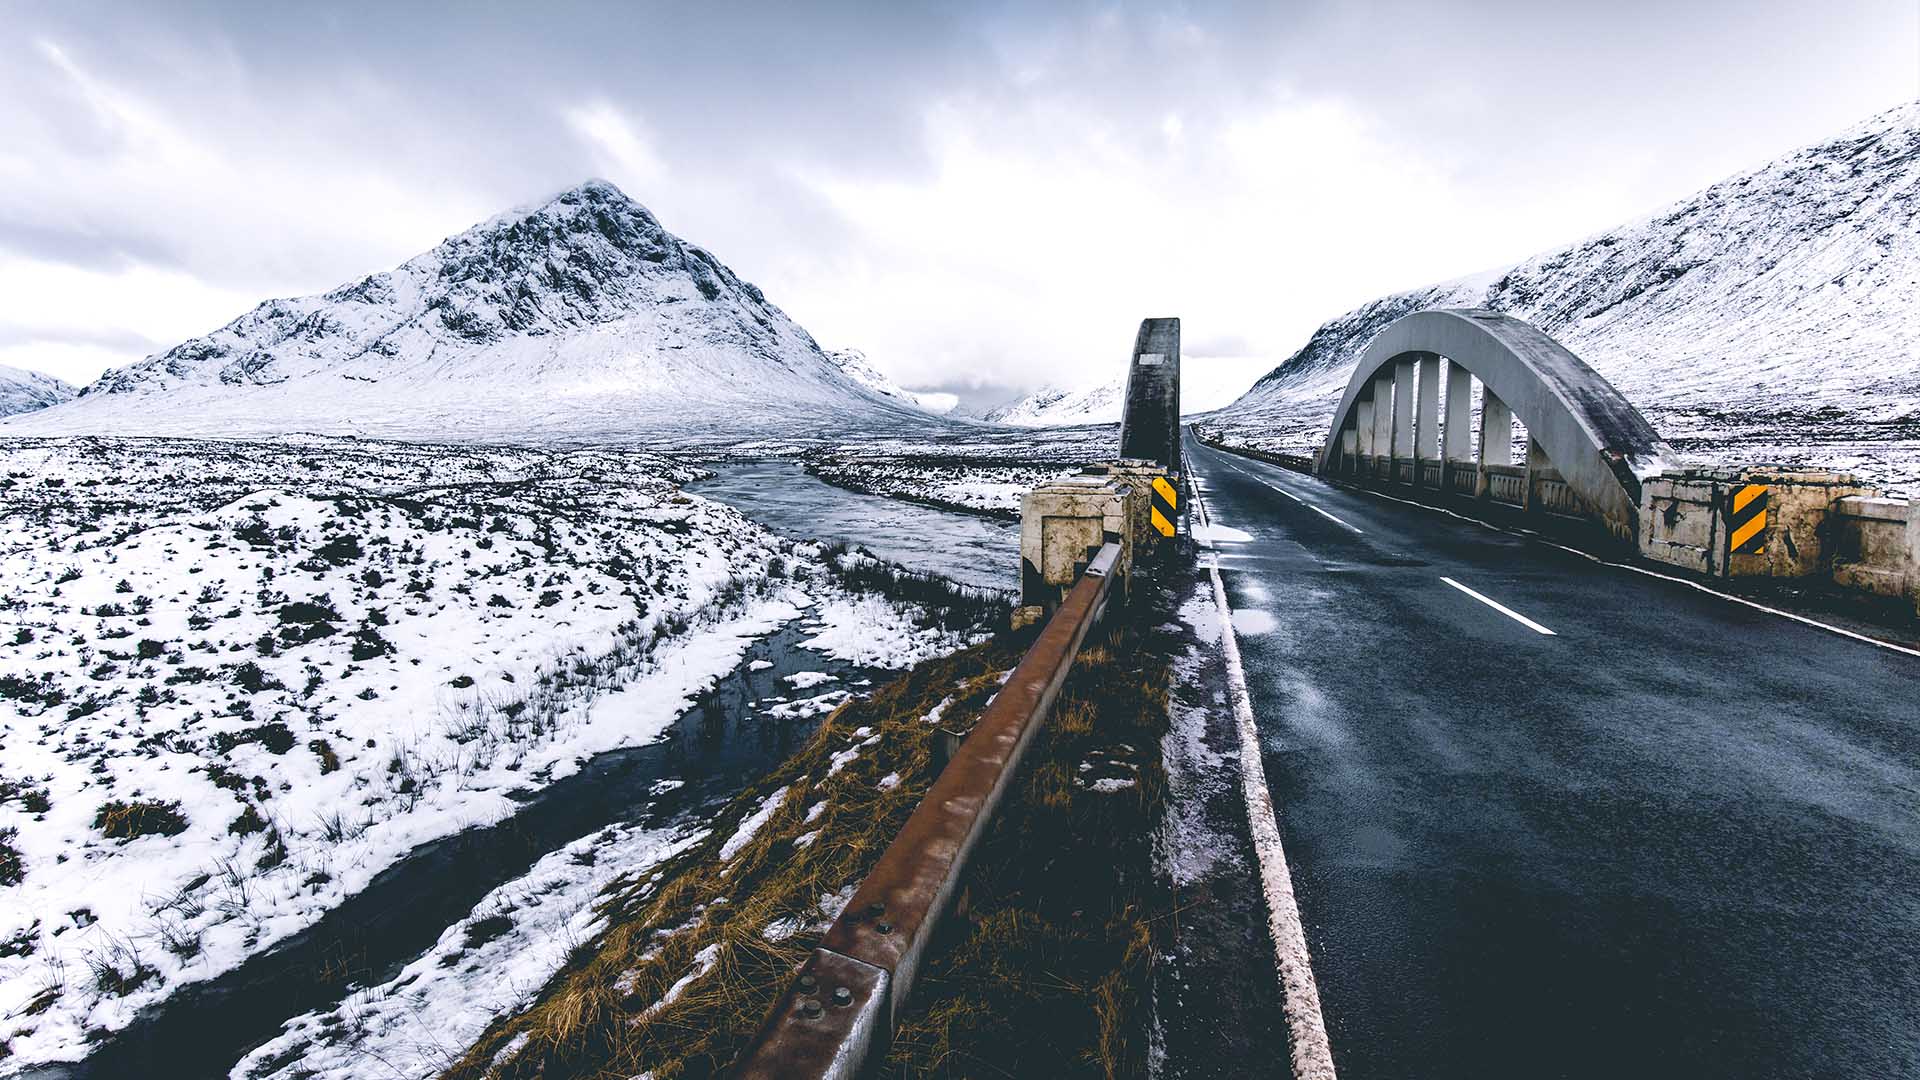 Driving across the Highlands during winter with white mountains ahead